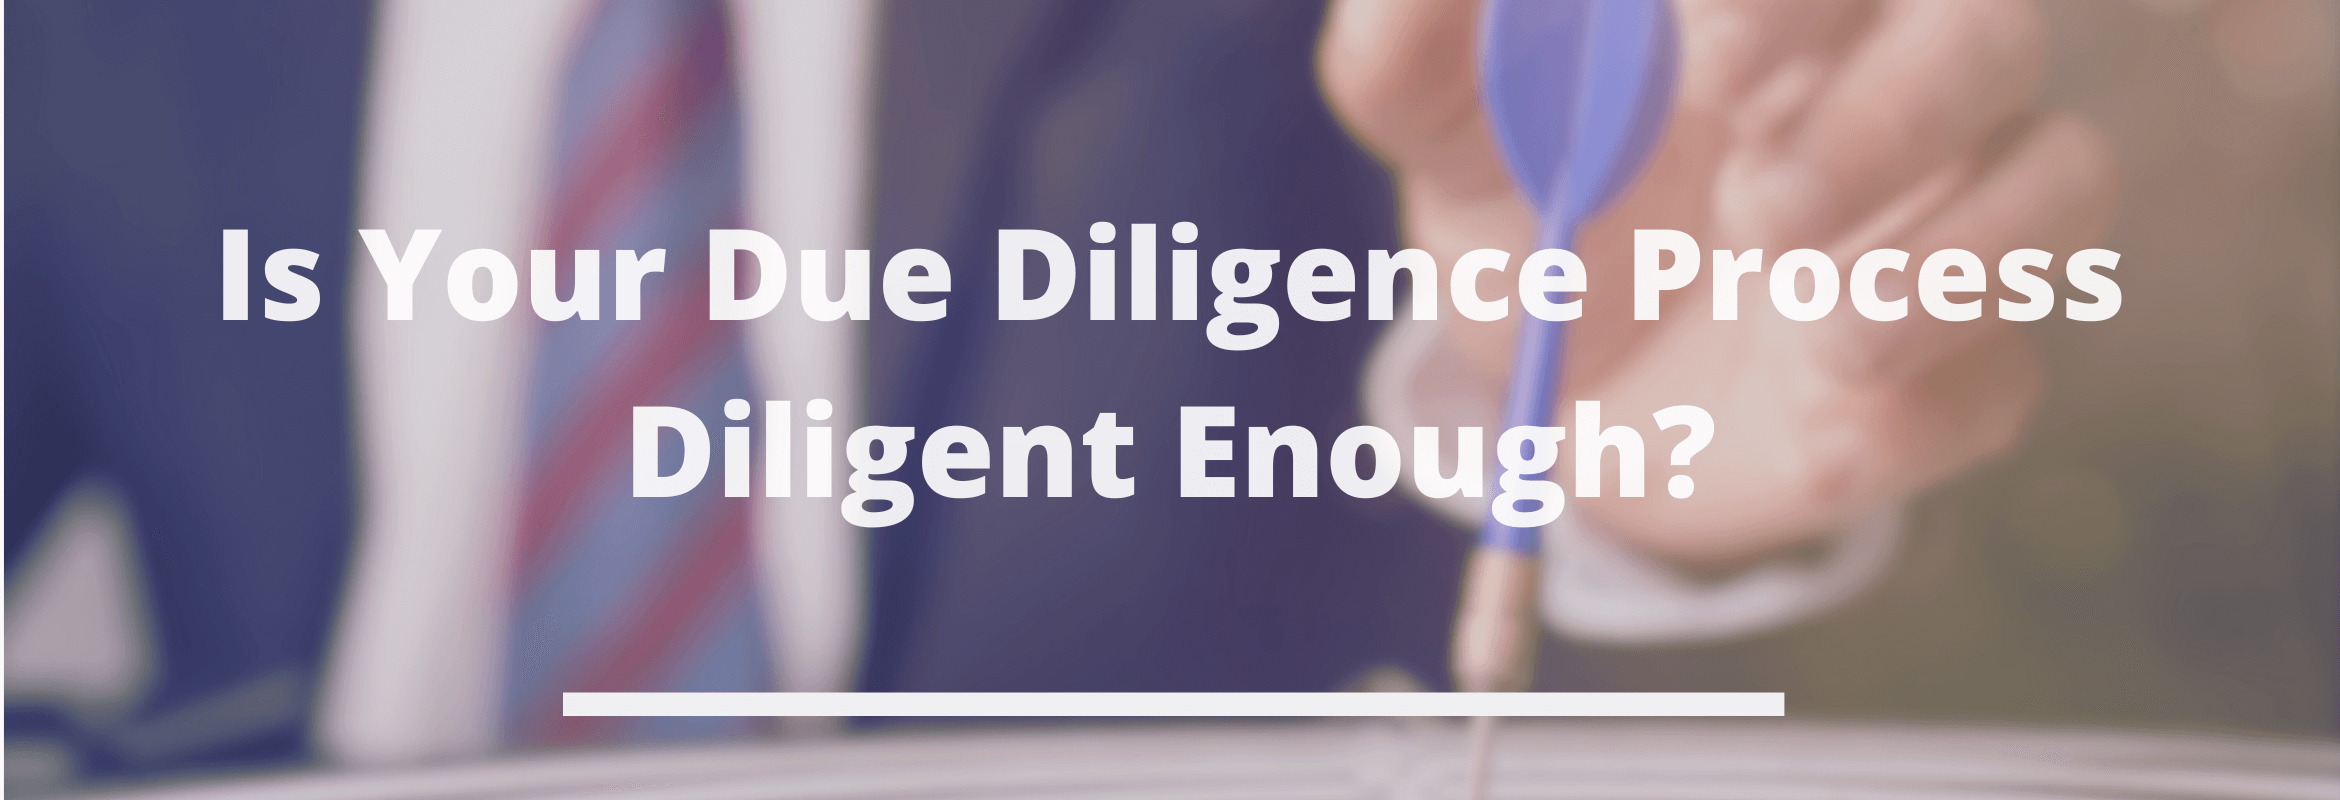 Image of Due Diligence